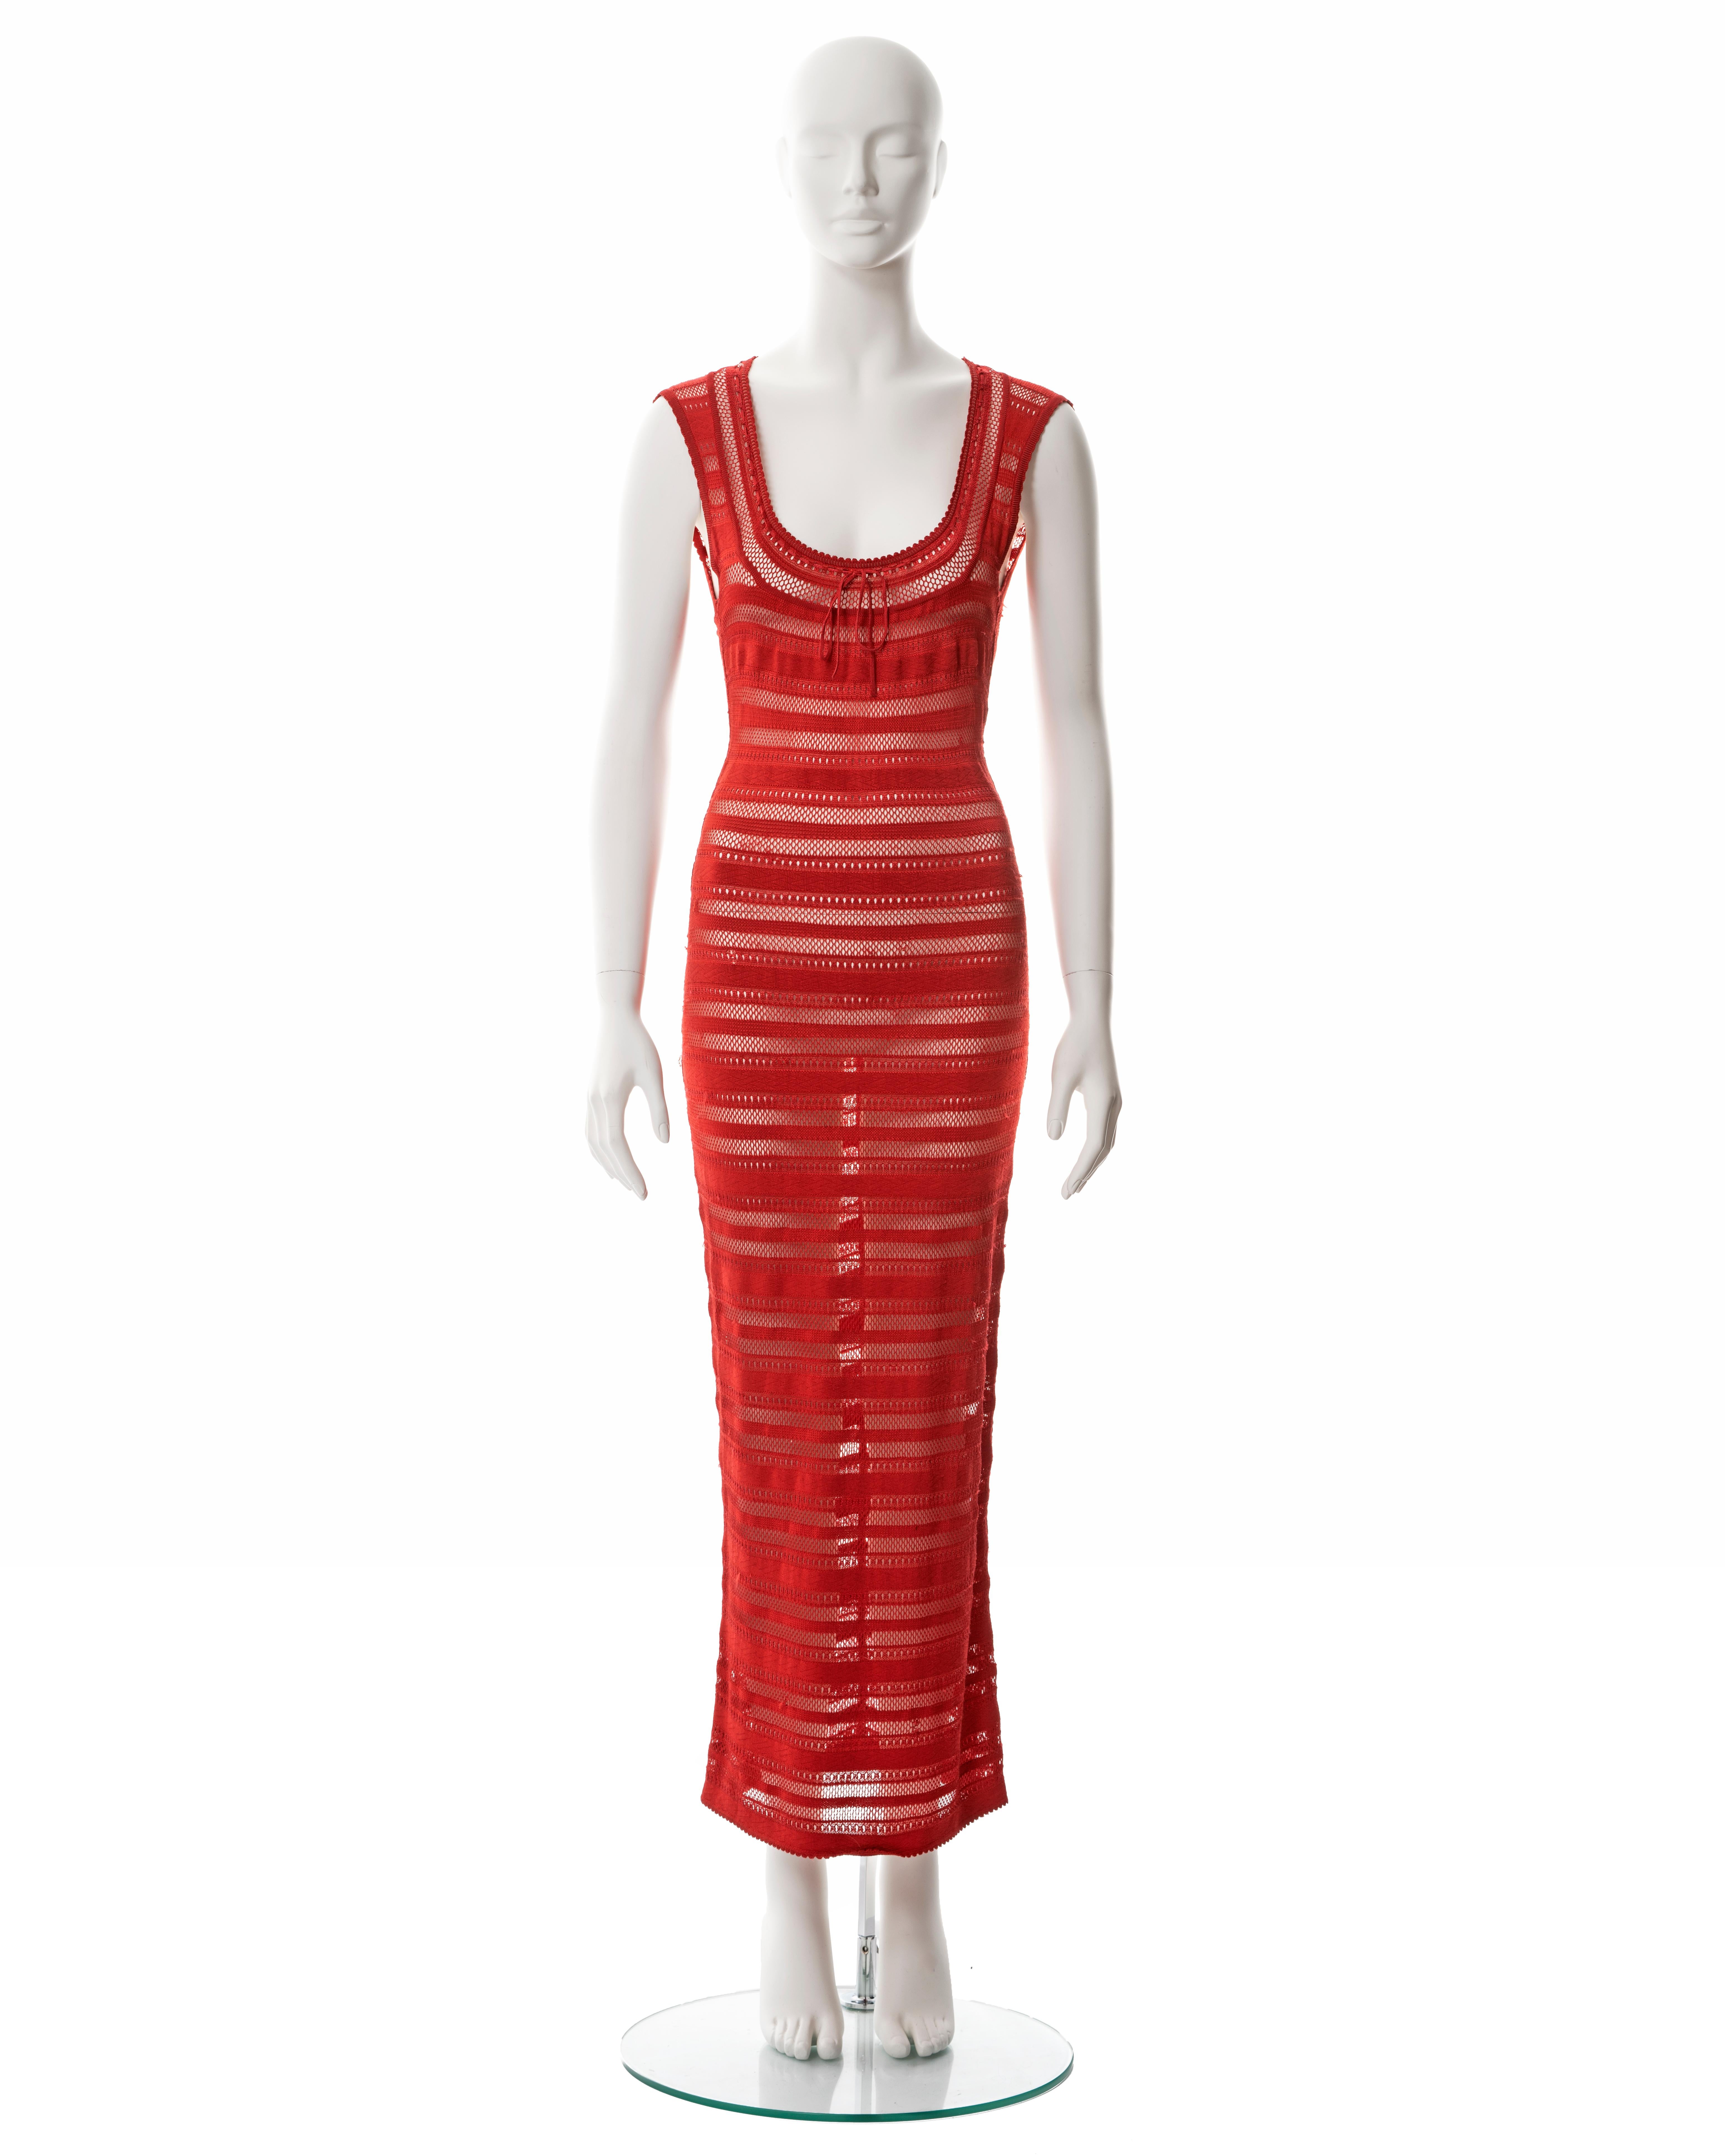 ▪ Azzedine Alaia red open knit maxi dress
▪ Sold by One of a Kind Archive
▪ Spring-Summer 1993
▪ Scoop neckline with drawstring ties 
▪ Figure-hugging fit 
▪ Horizontal open-knit stripes 
▪ Size Small
▪ Made in Italy

All photographs in this listing